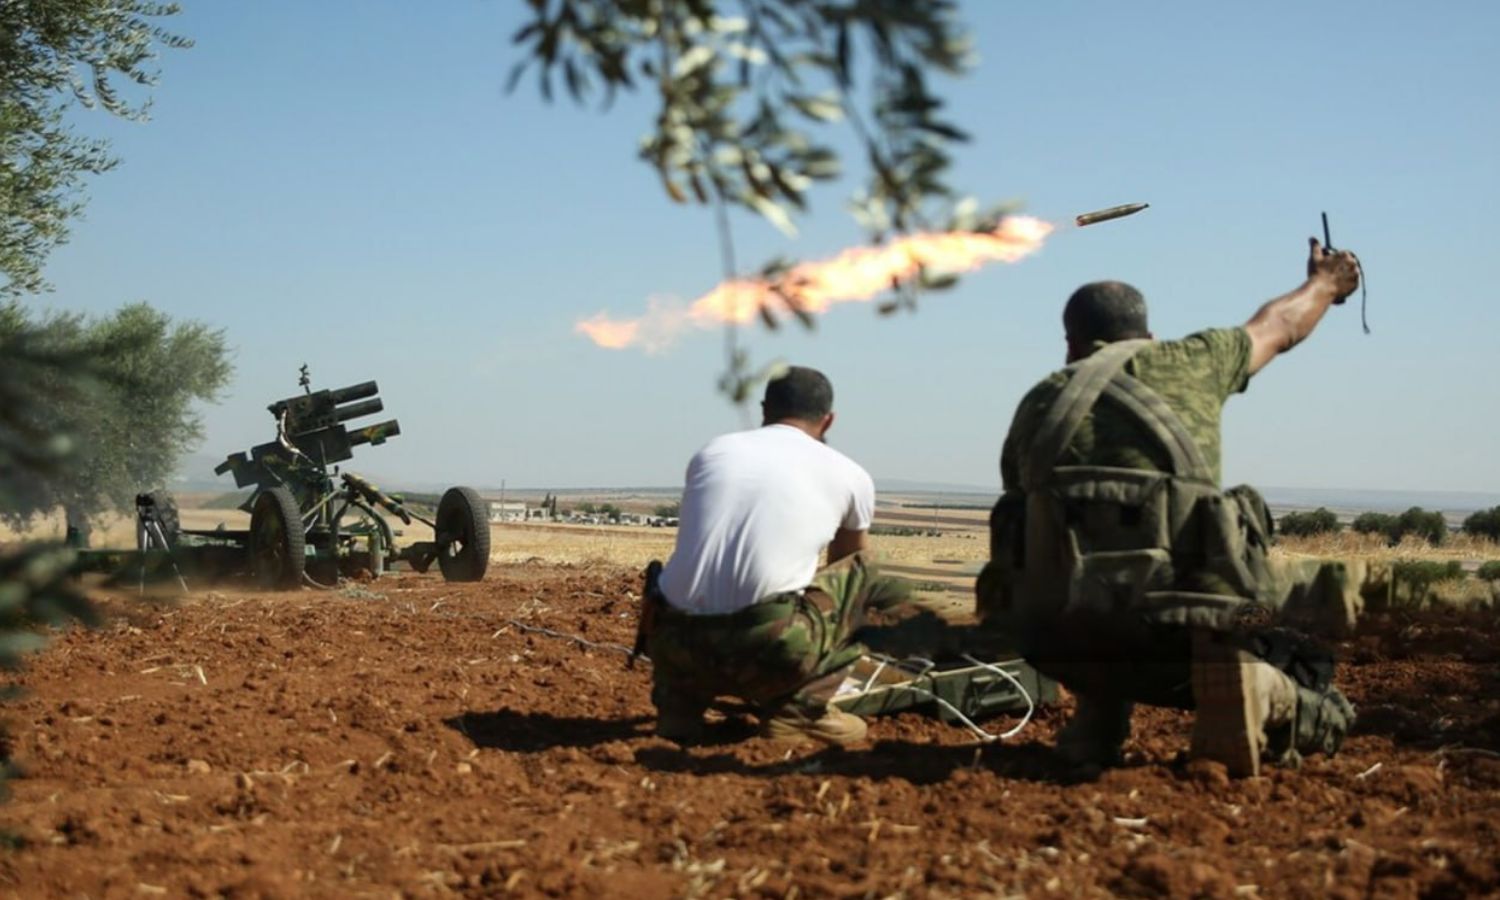 Members of Liwa al-Tawhid during clashes with the Islamic State in Aleppo countryside - August 13, 2015 (Anadolu Agency)